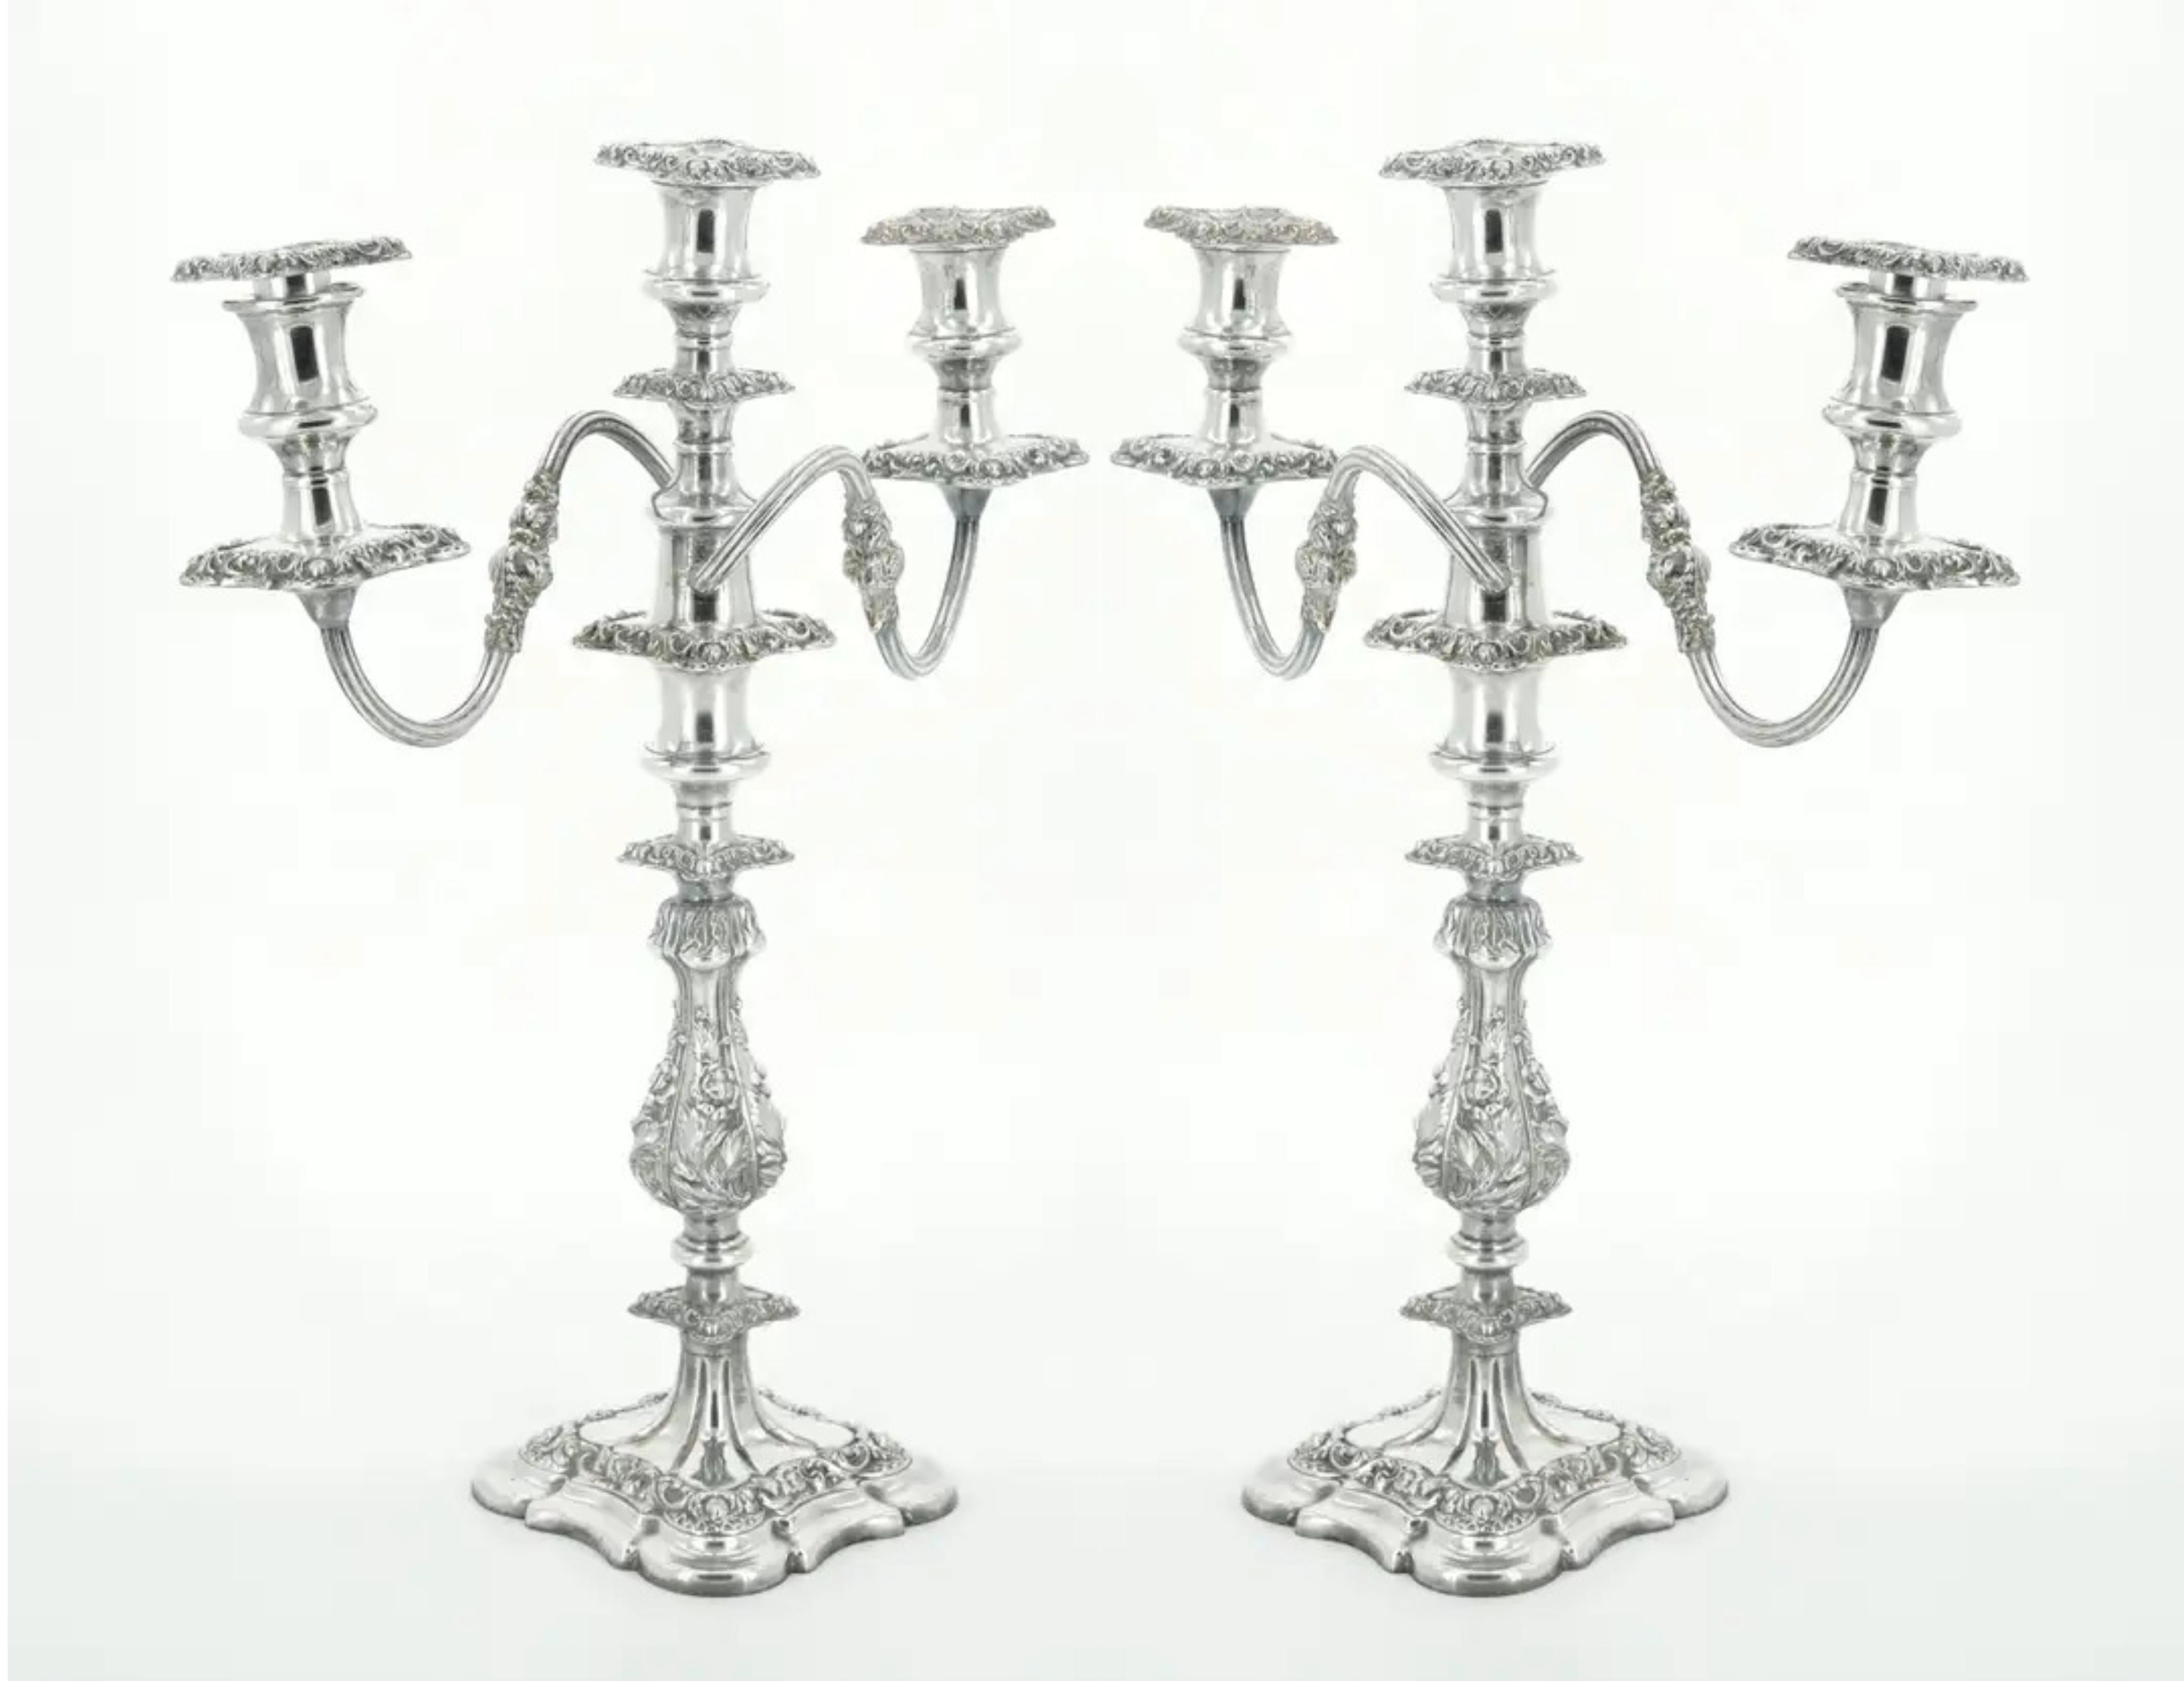 Immerse yourself in the grandeur of the mid-19th century with our distinguished pair of Silver Plate Edwardian Period George III Style Three-Light Tableware Candelabra. This exceptional duo exudes opulence, featuring elaborate floral and foliate